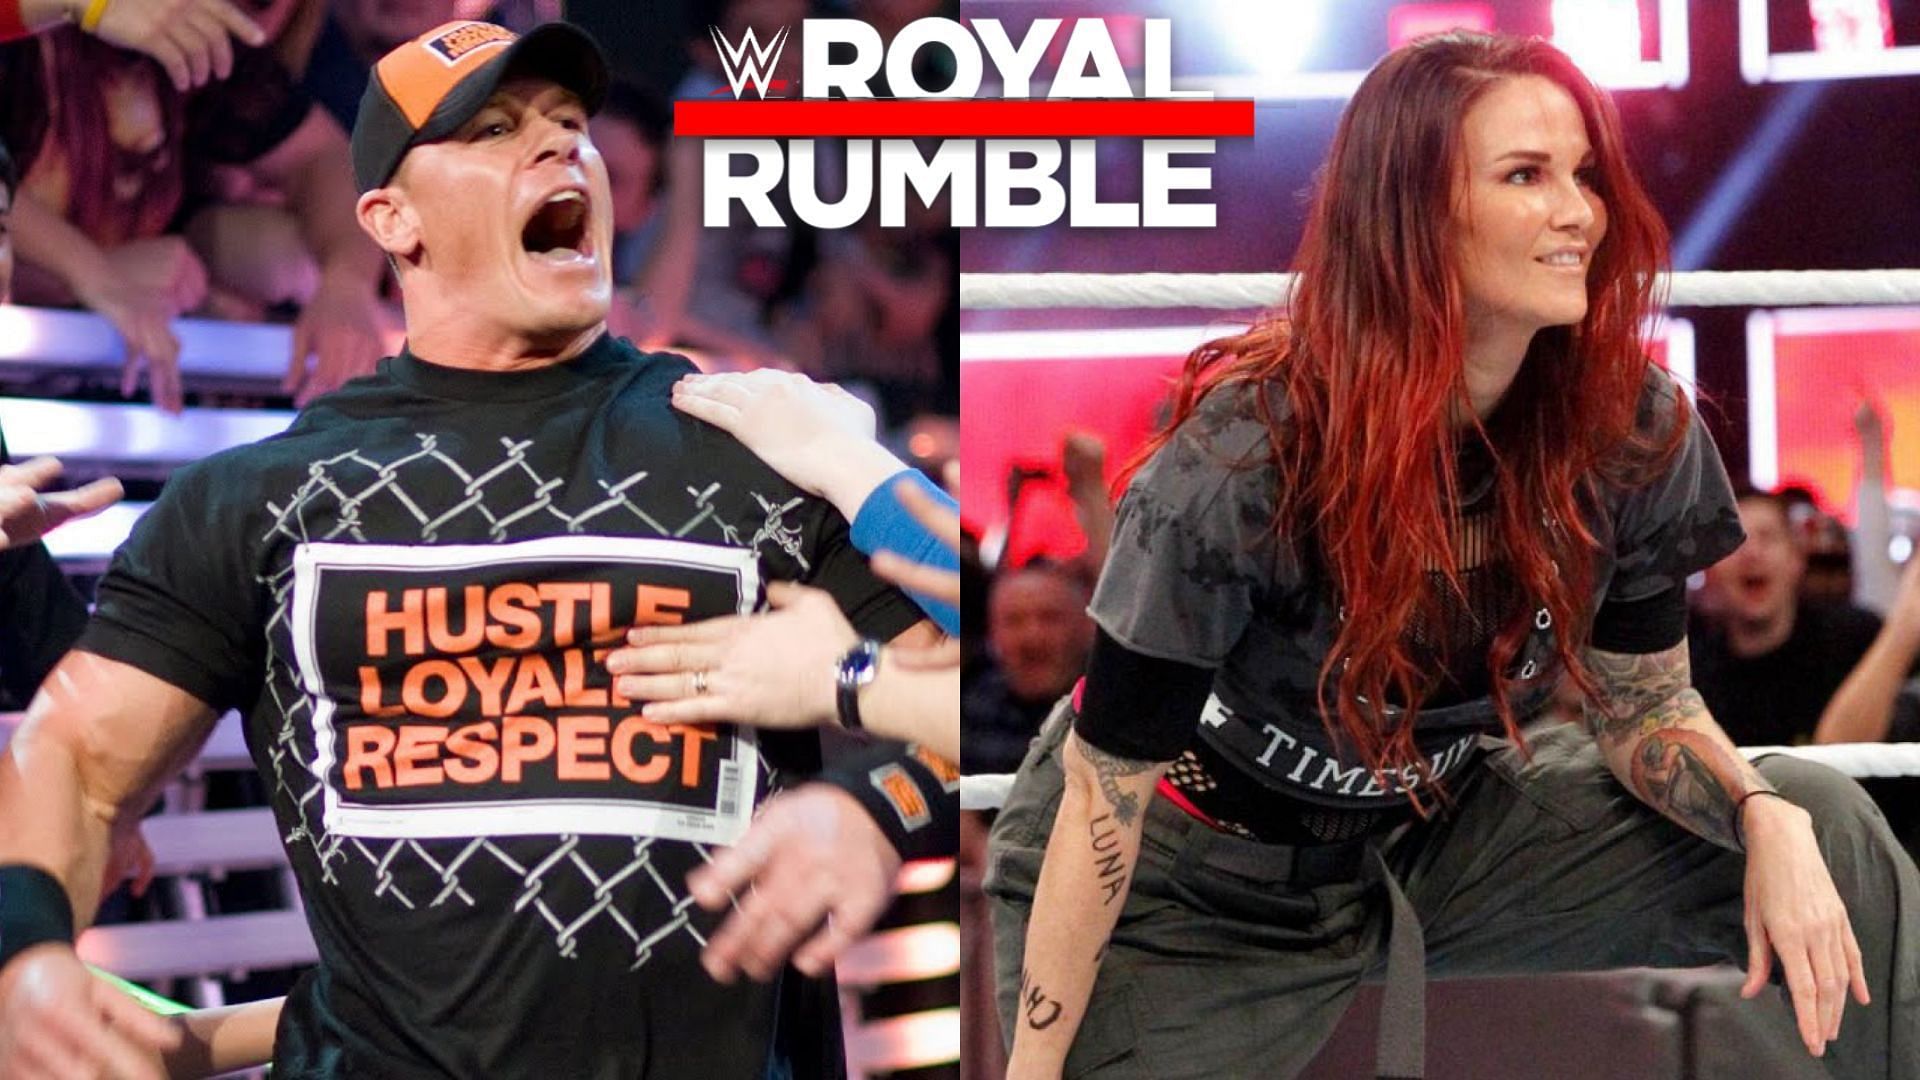 The WWE Royal Rumble will air on January 28th